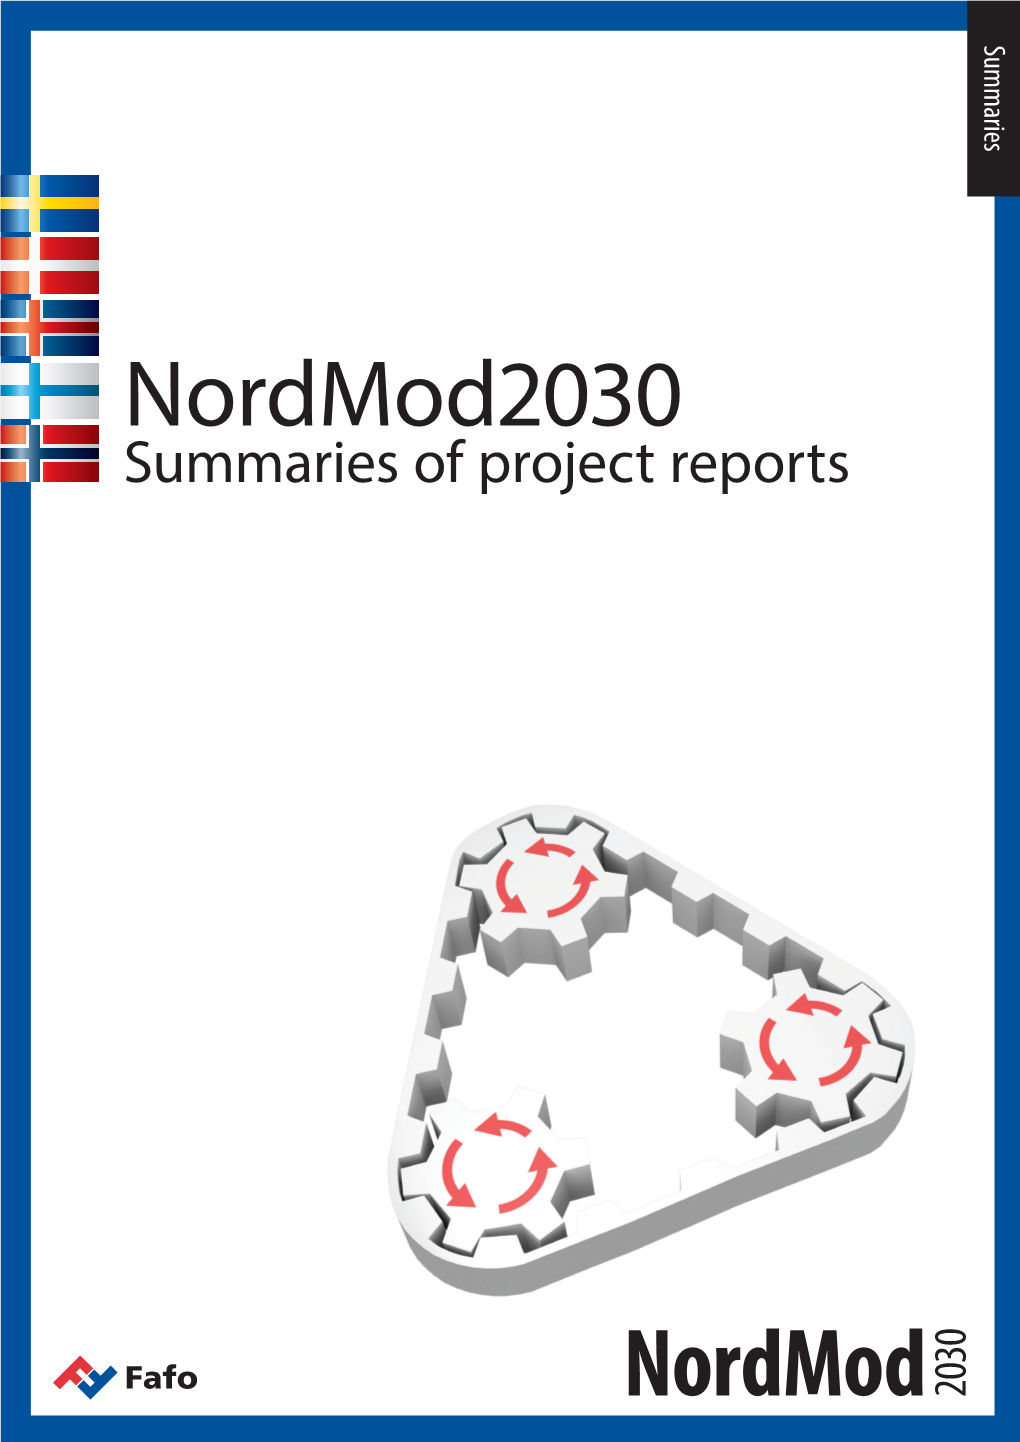 Nordmod2030 Summaries of Project Reports